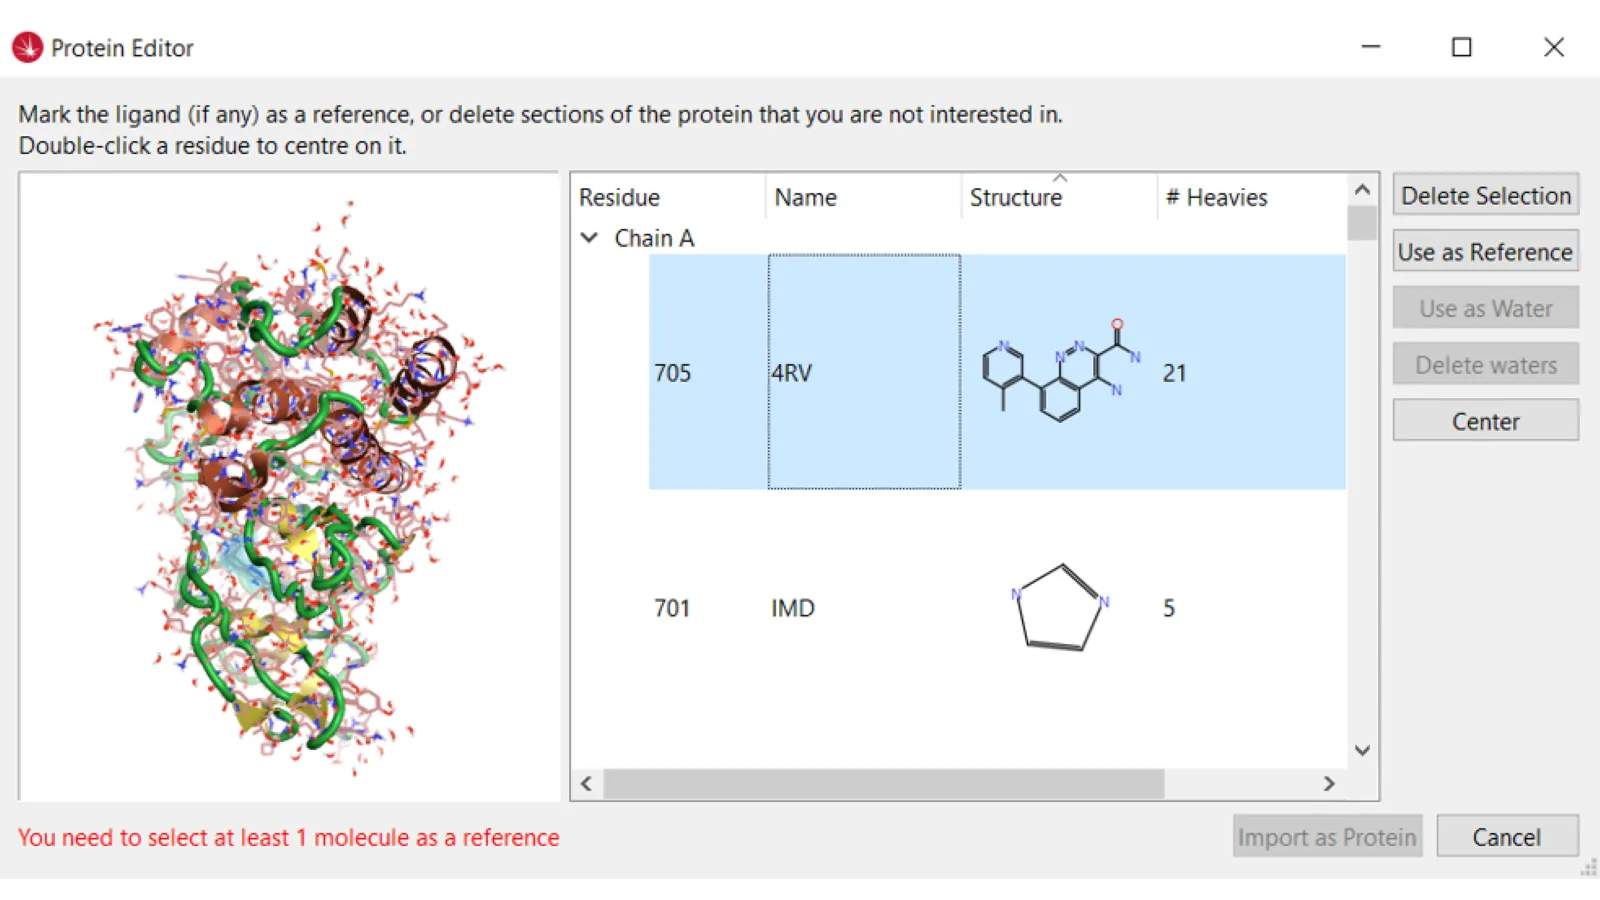 Uploading the protein-ligand complex into Spark for the water replacement experiment.